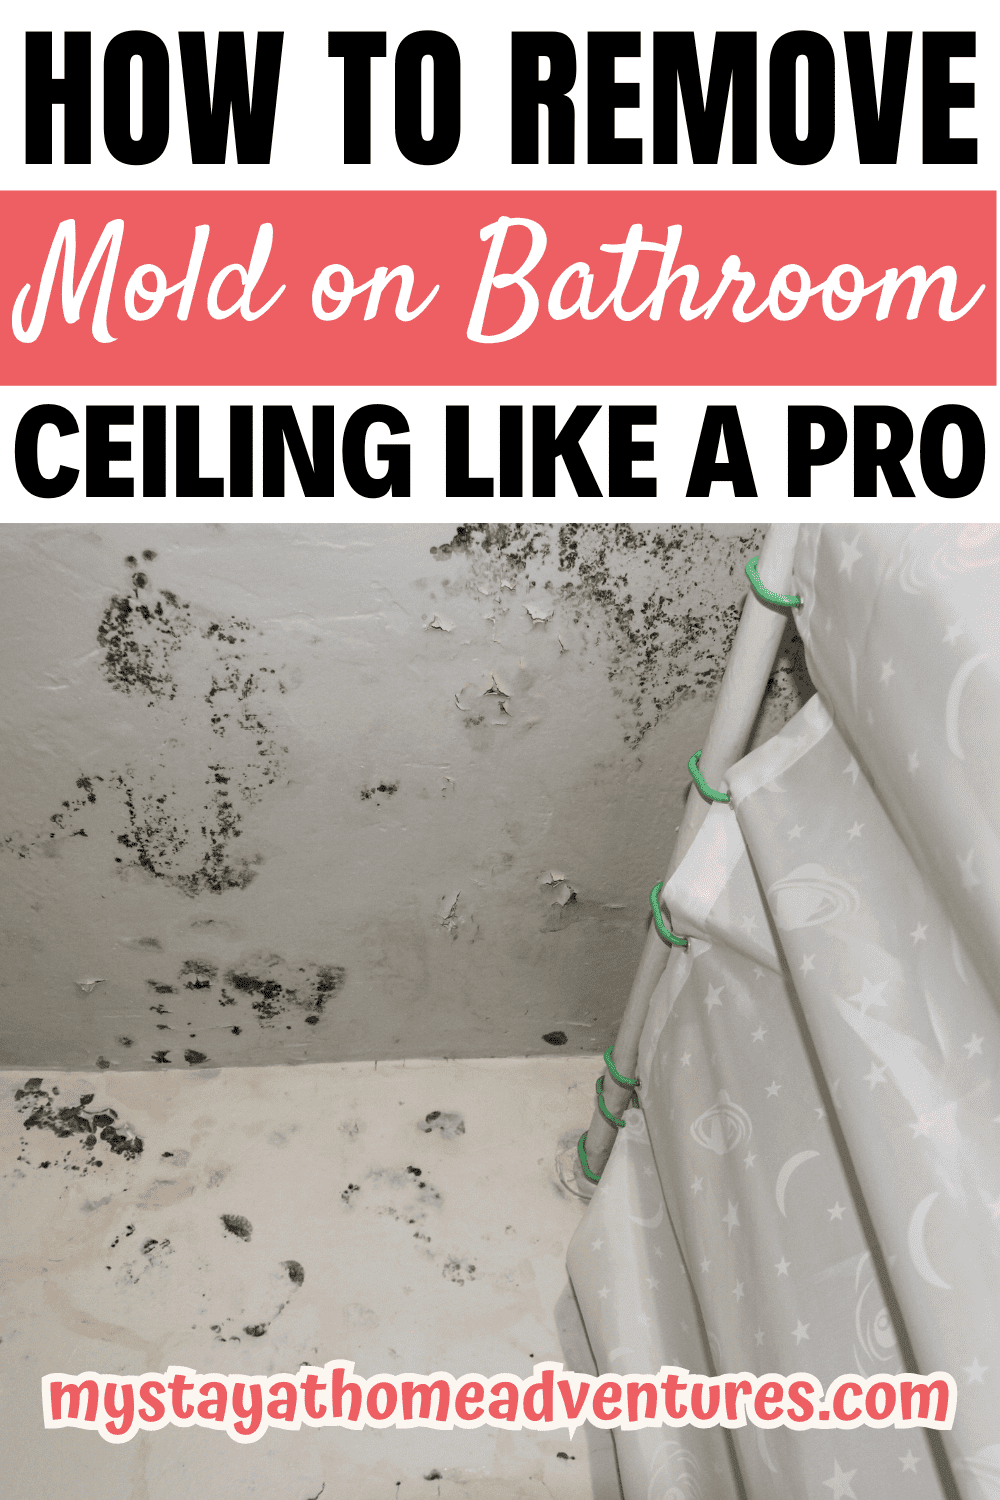 mold in a ceiling with text: "How to Remove Mold on Bathroom Ceiling Like a Pro"